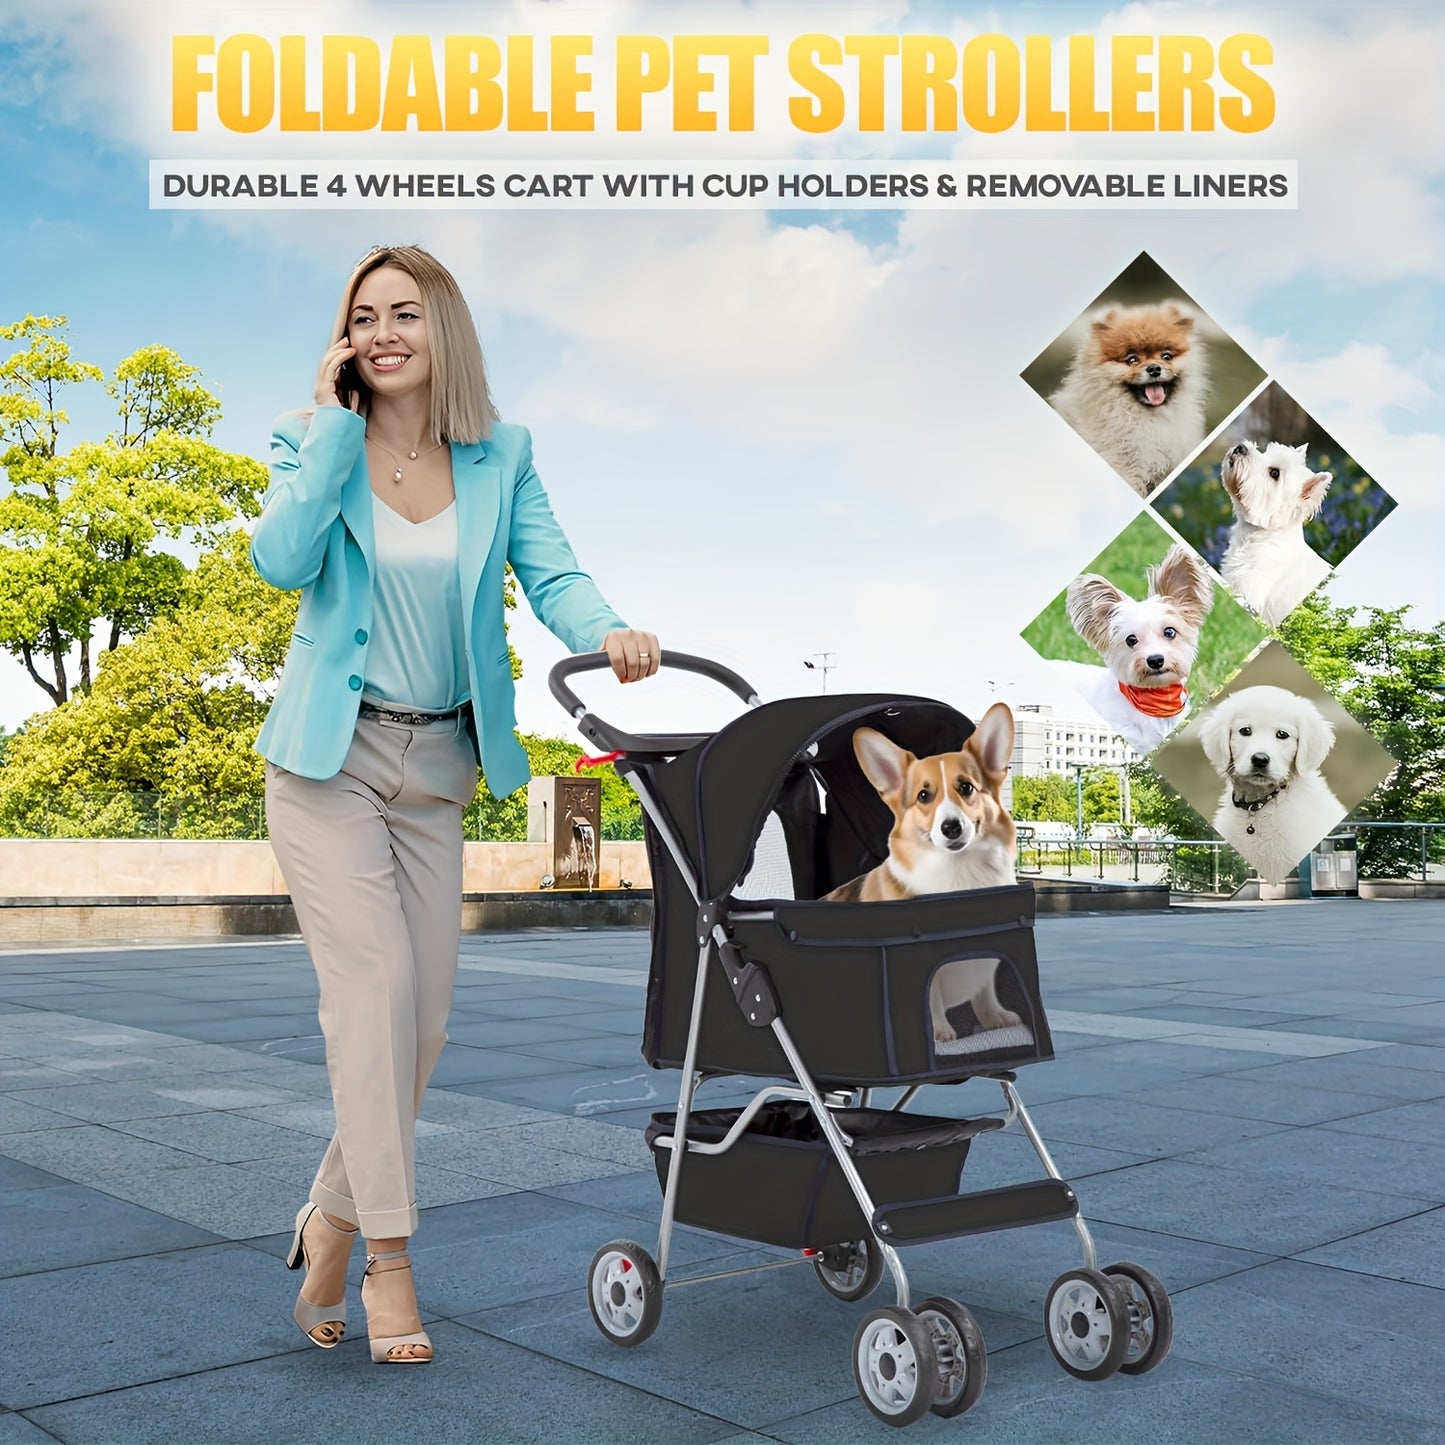 4 Wheels Pet Stroller - Comfortable and Convenient Carrier for Dogs and Cats - Spacious Storage, Cup Holder, Portable, Breathable, and Perfect for Outdoor Adventures